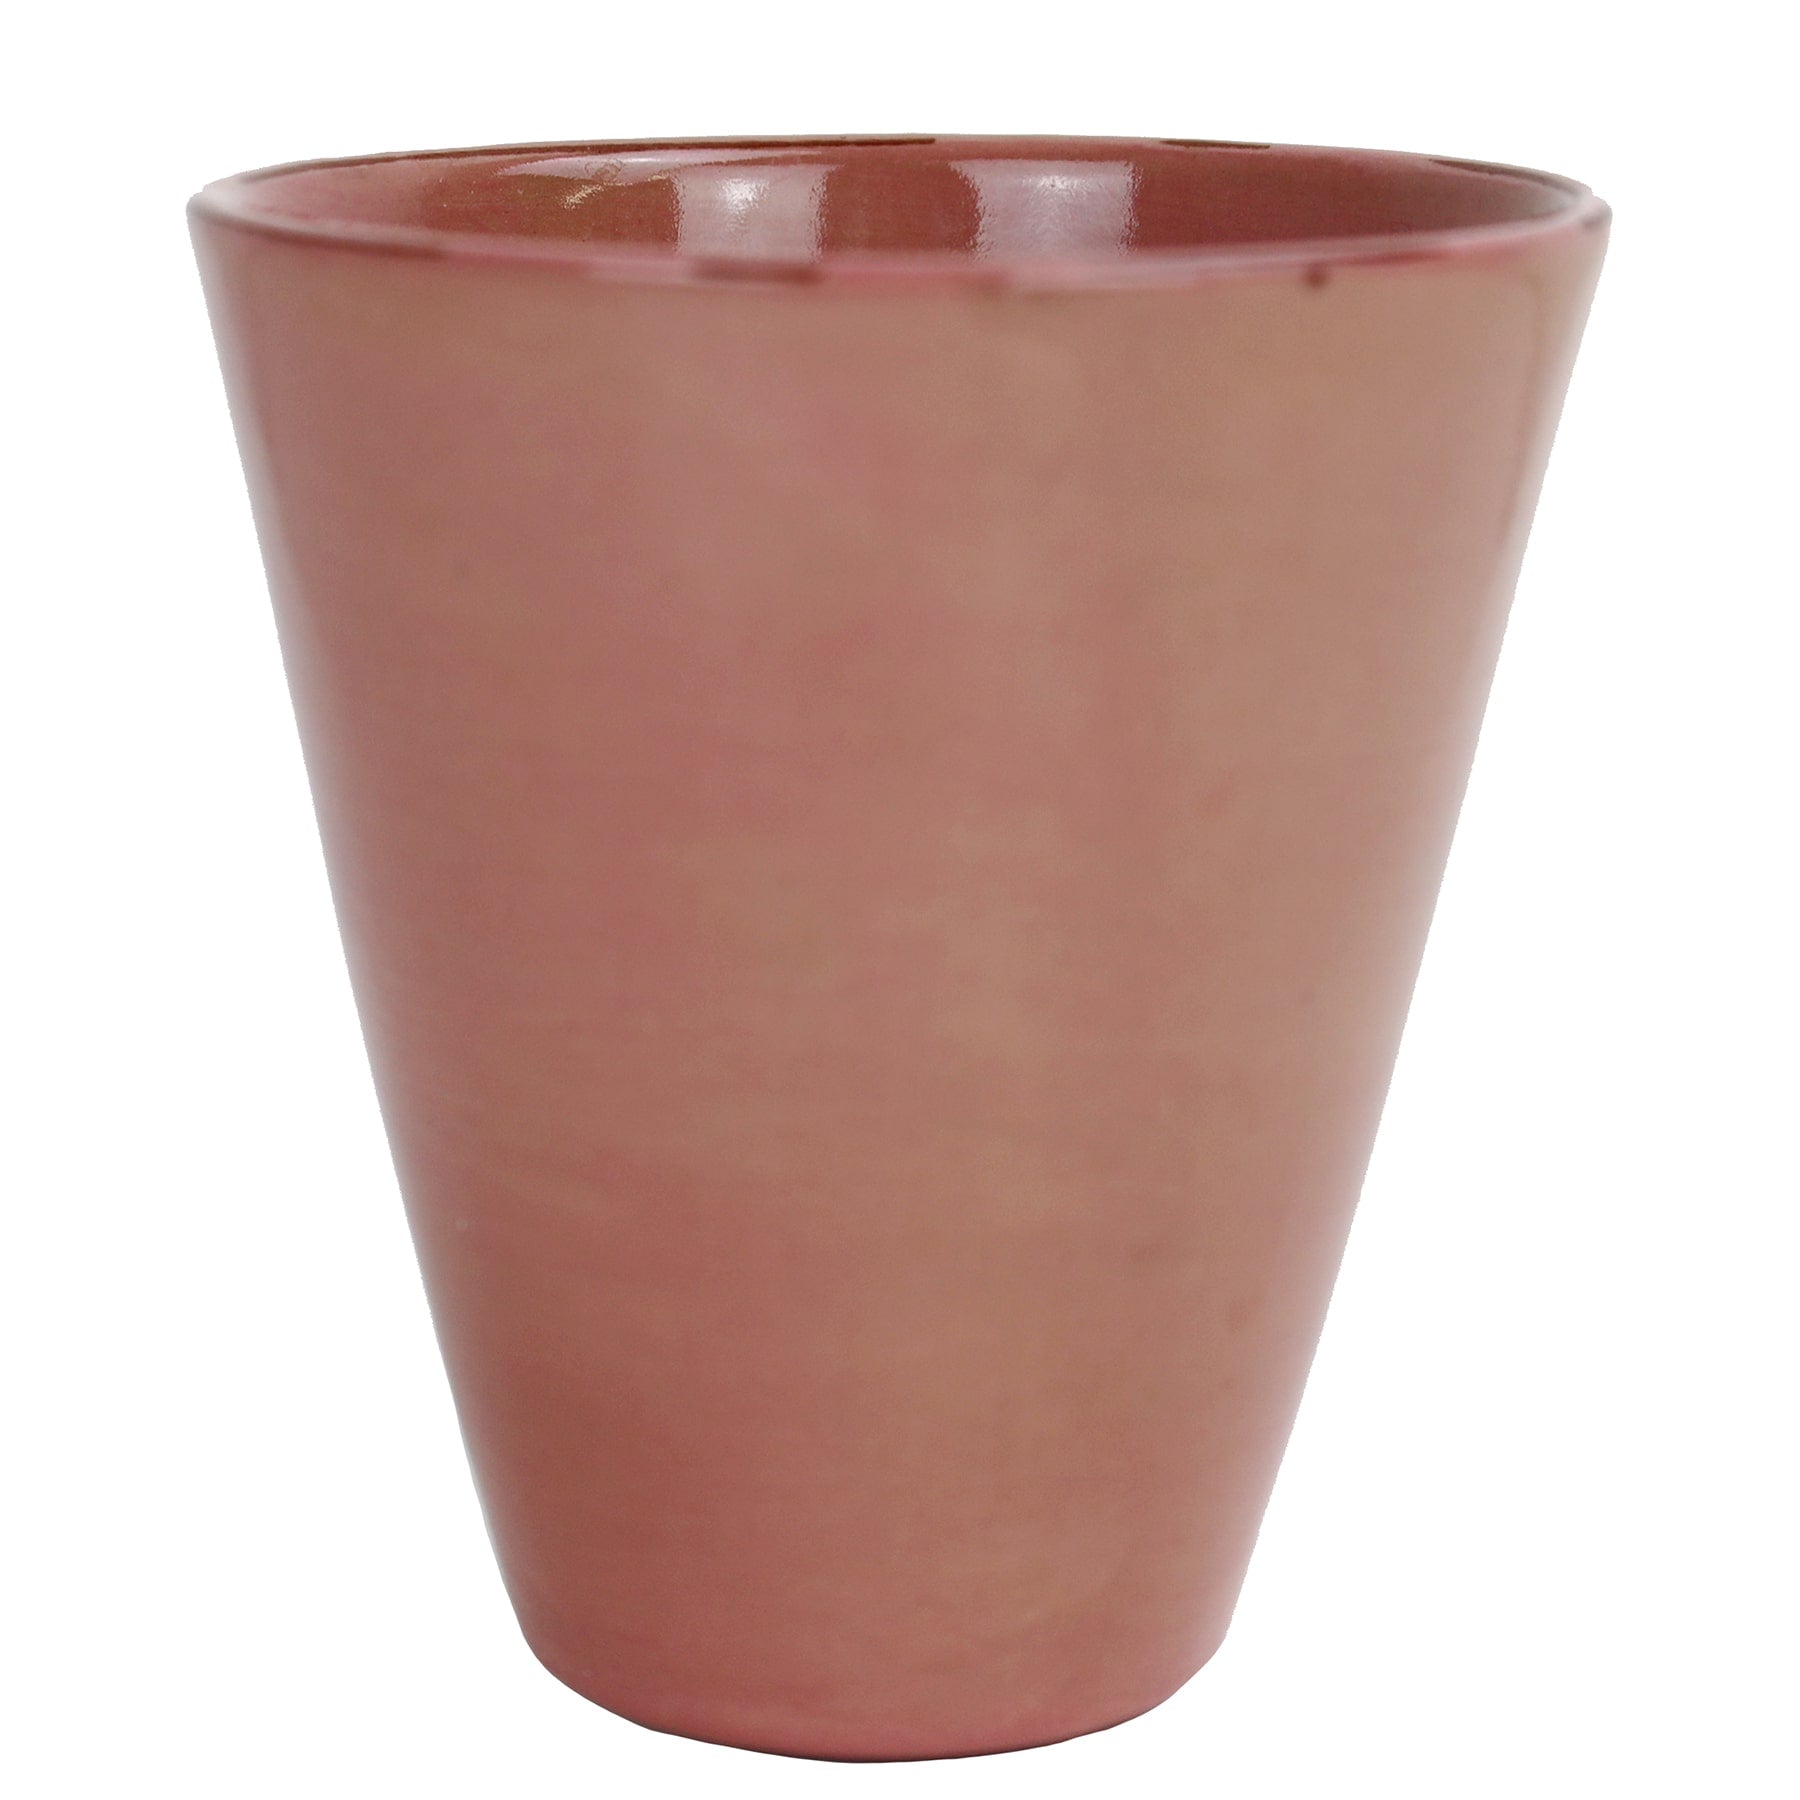 Provencal Ceramic Coffee Cup in Dusky Pink